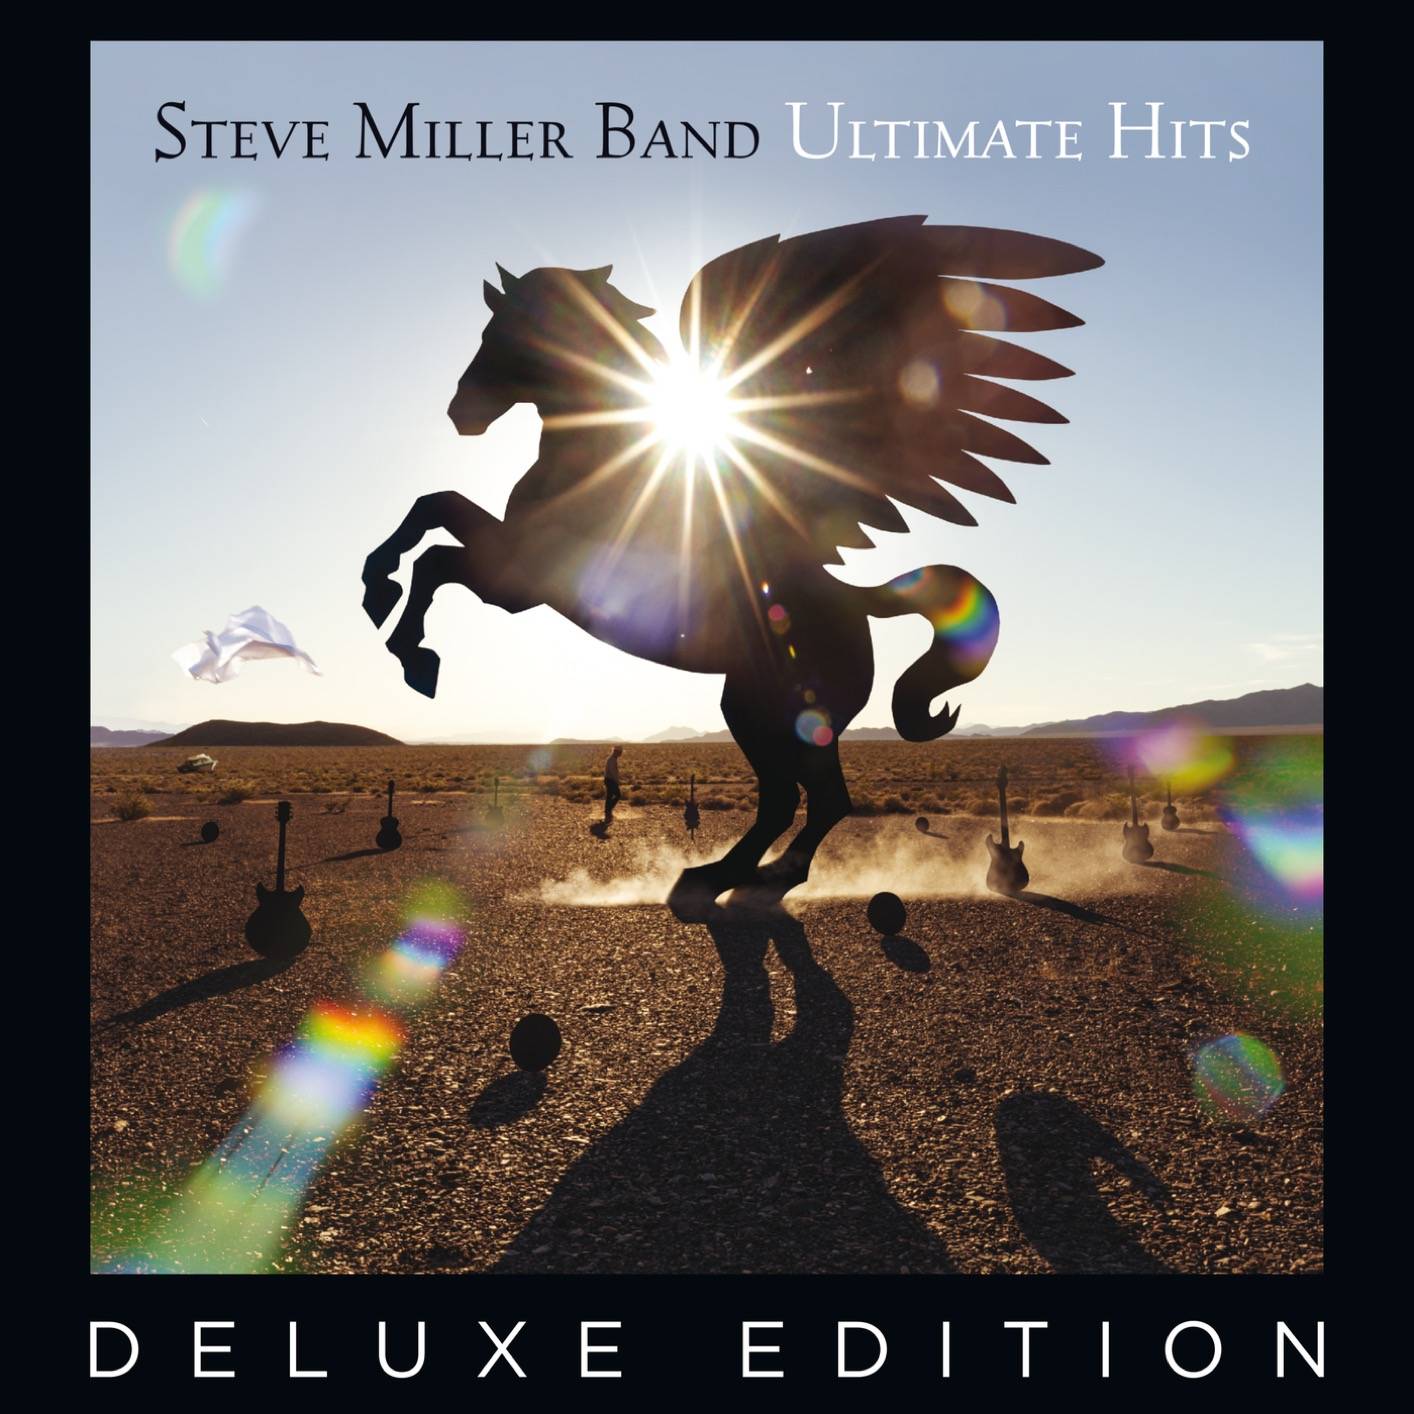 Steve Miller Band - Ultimate Hits (Deluxe Edition Remastered) (2017) [FLAC 24bit/96kHz]